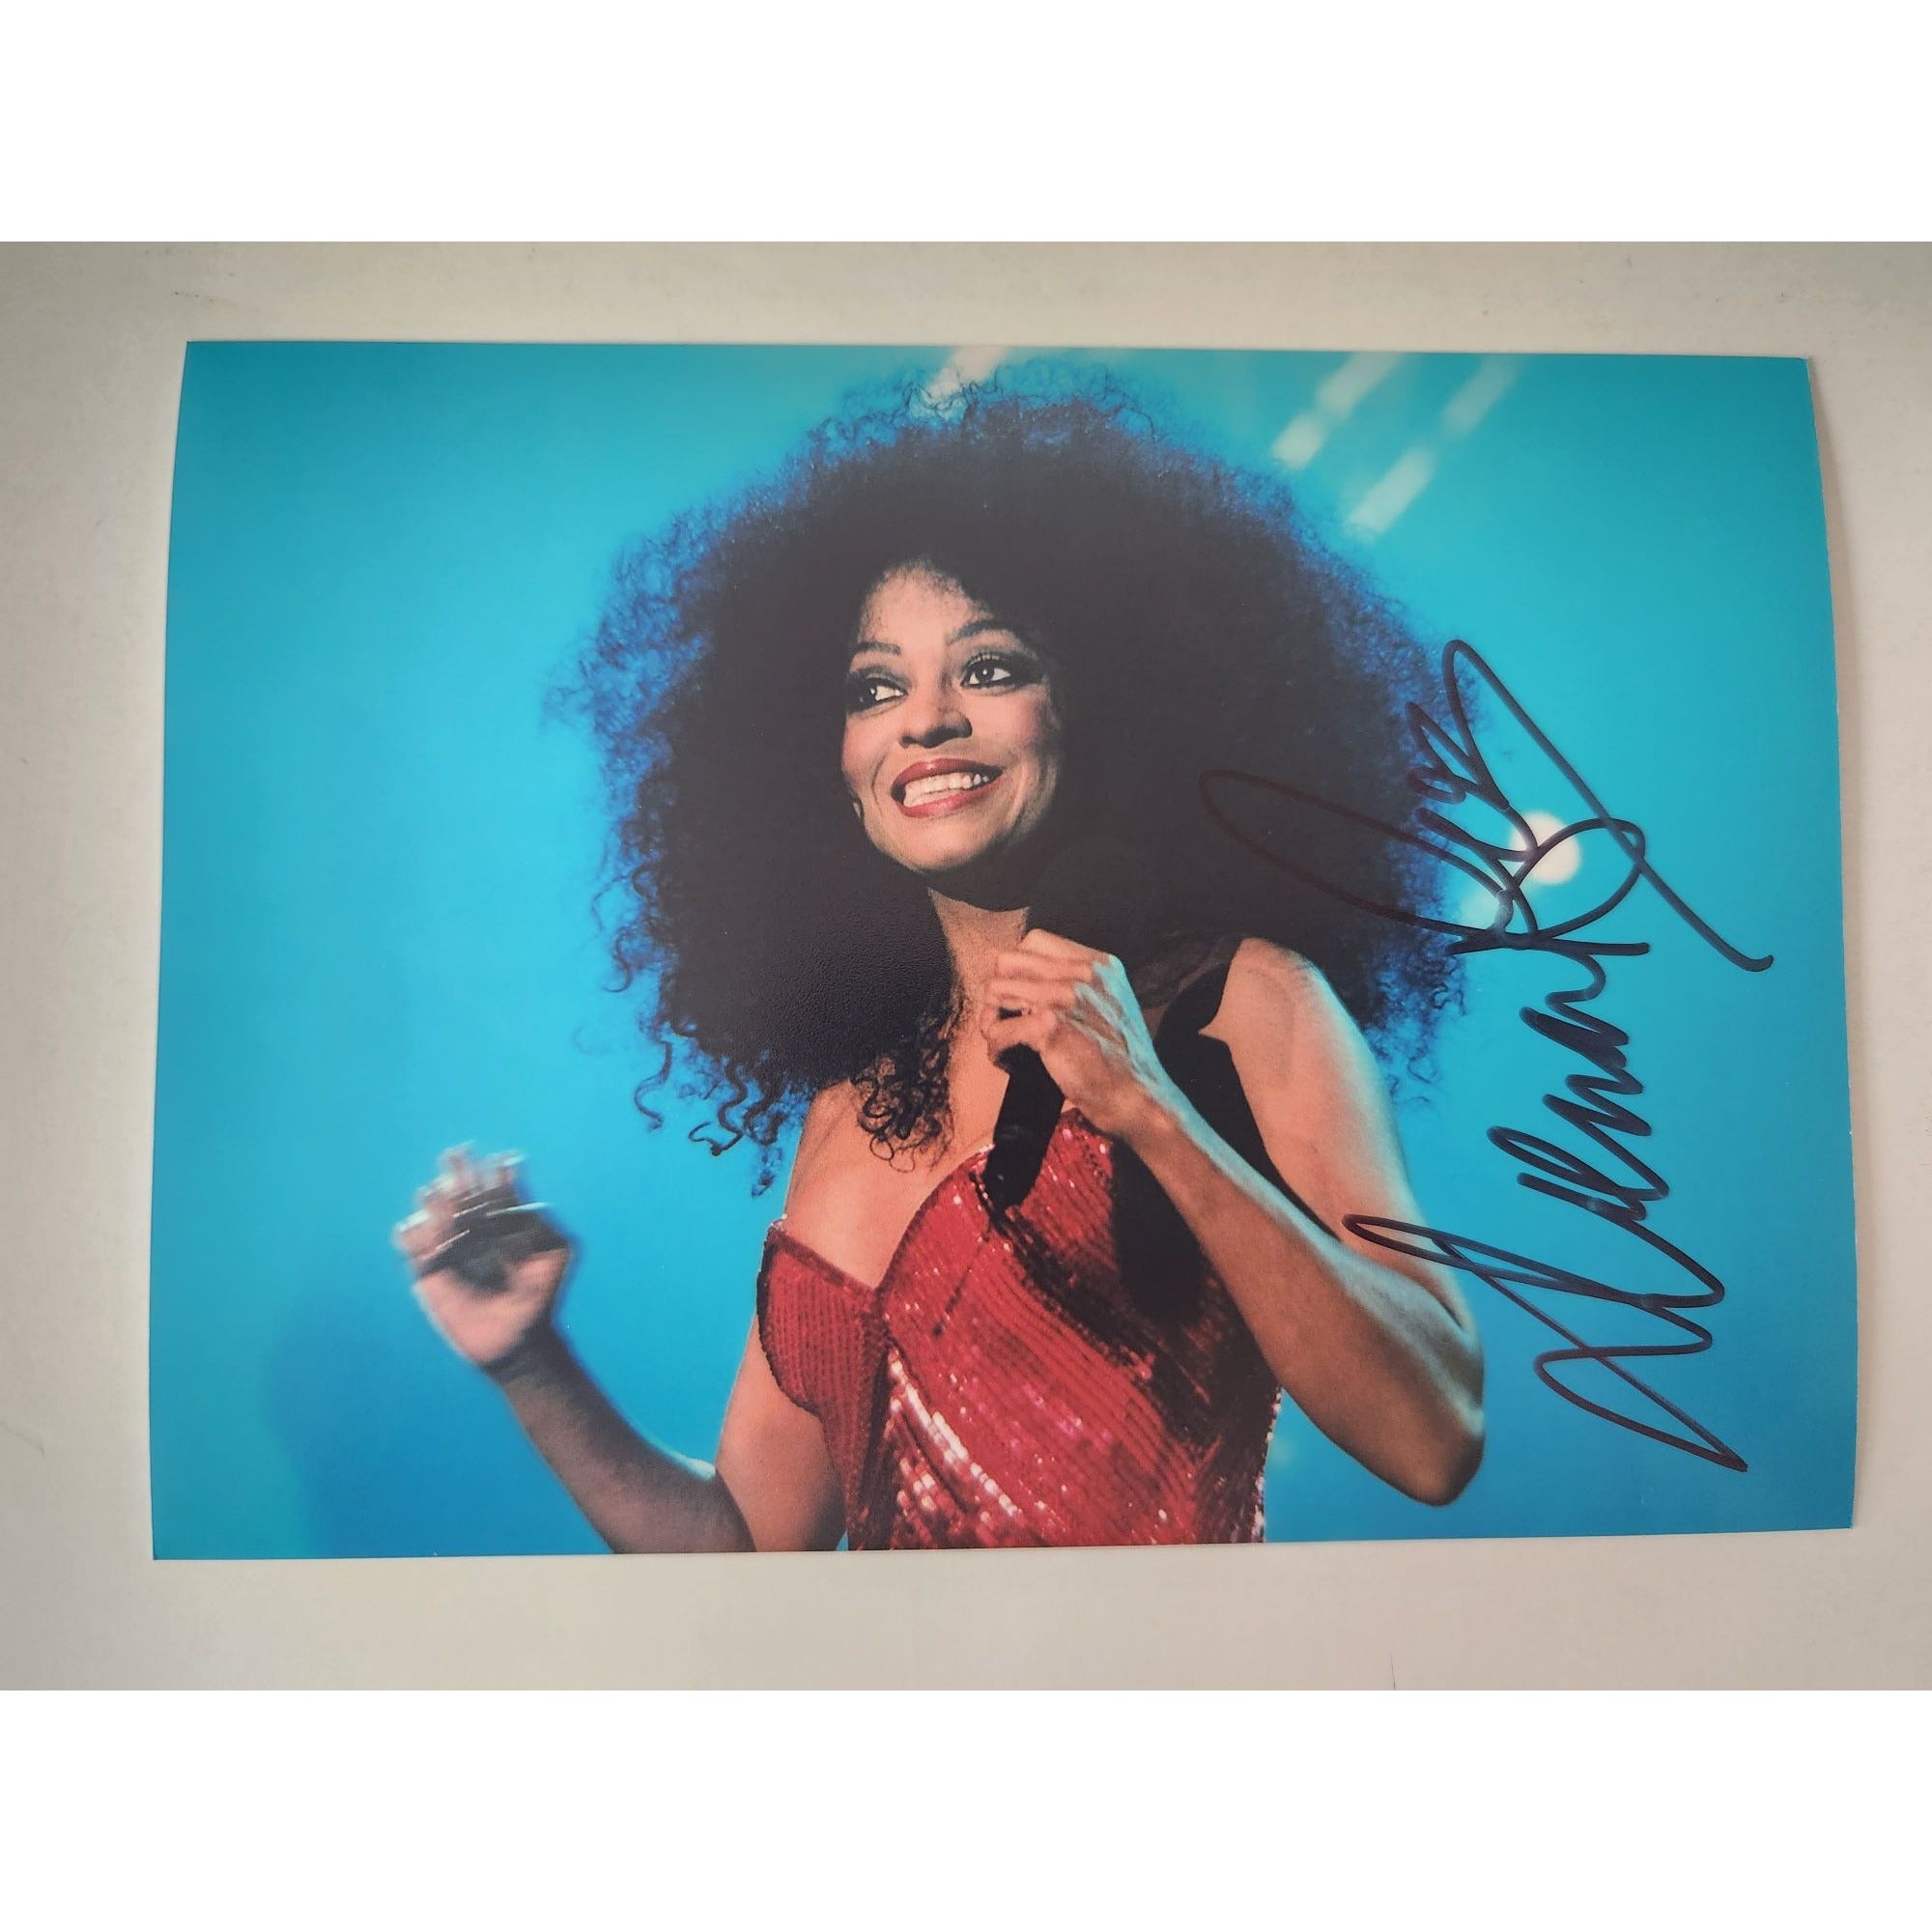 Diana Ross 5x7 photo signed with proof